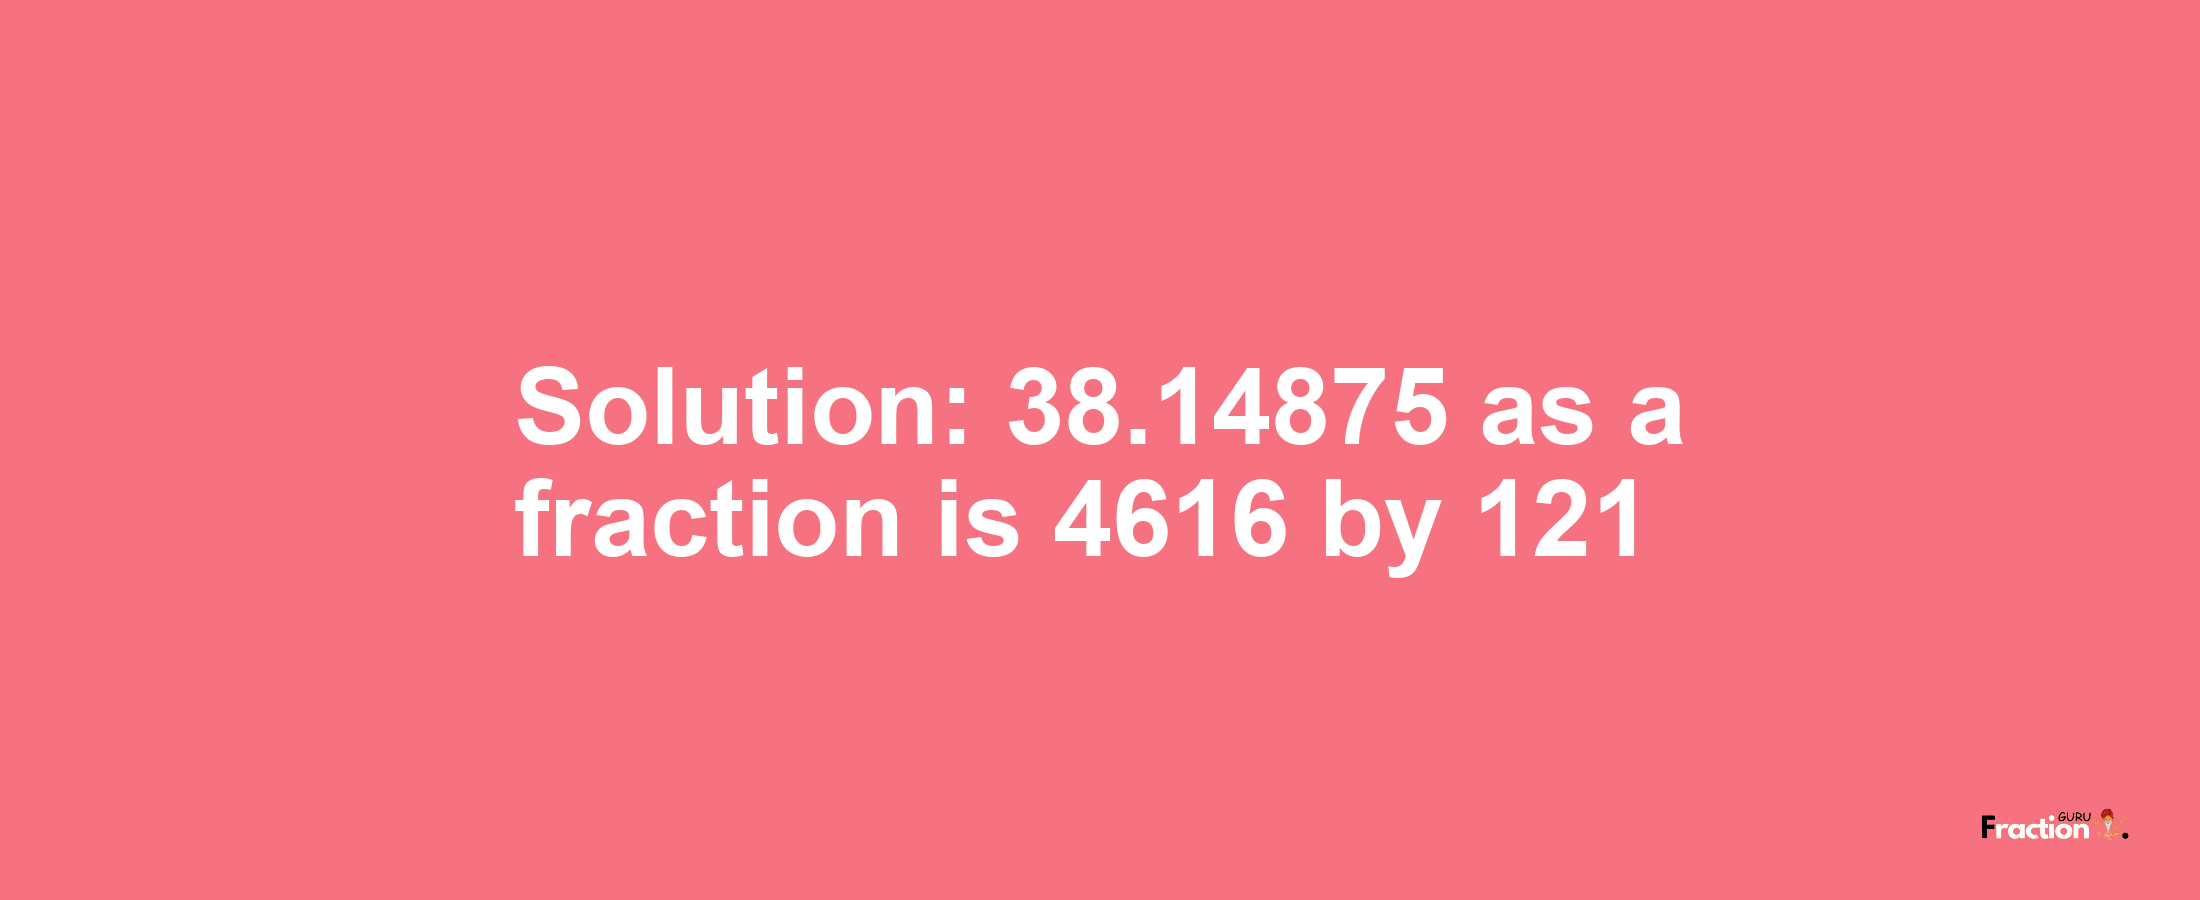 Solution:38.14875 as a fraction is 4616/121